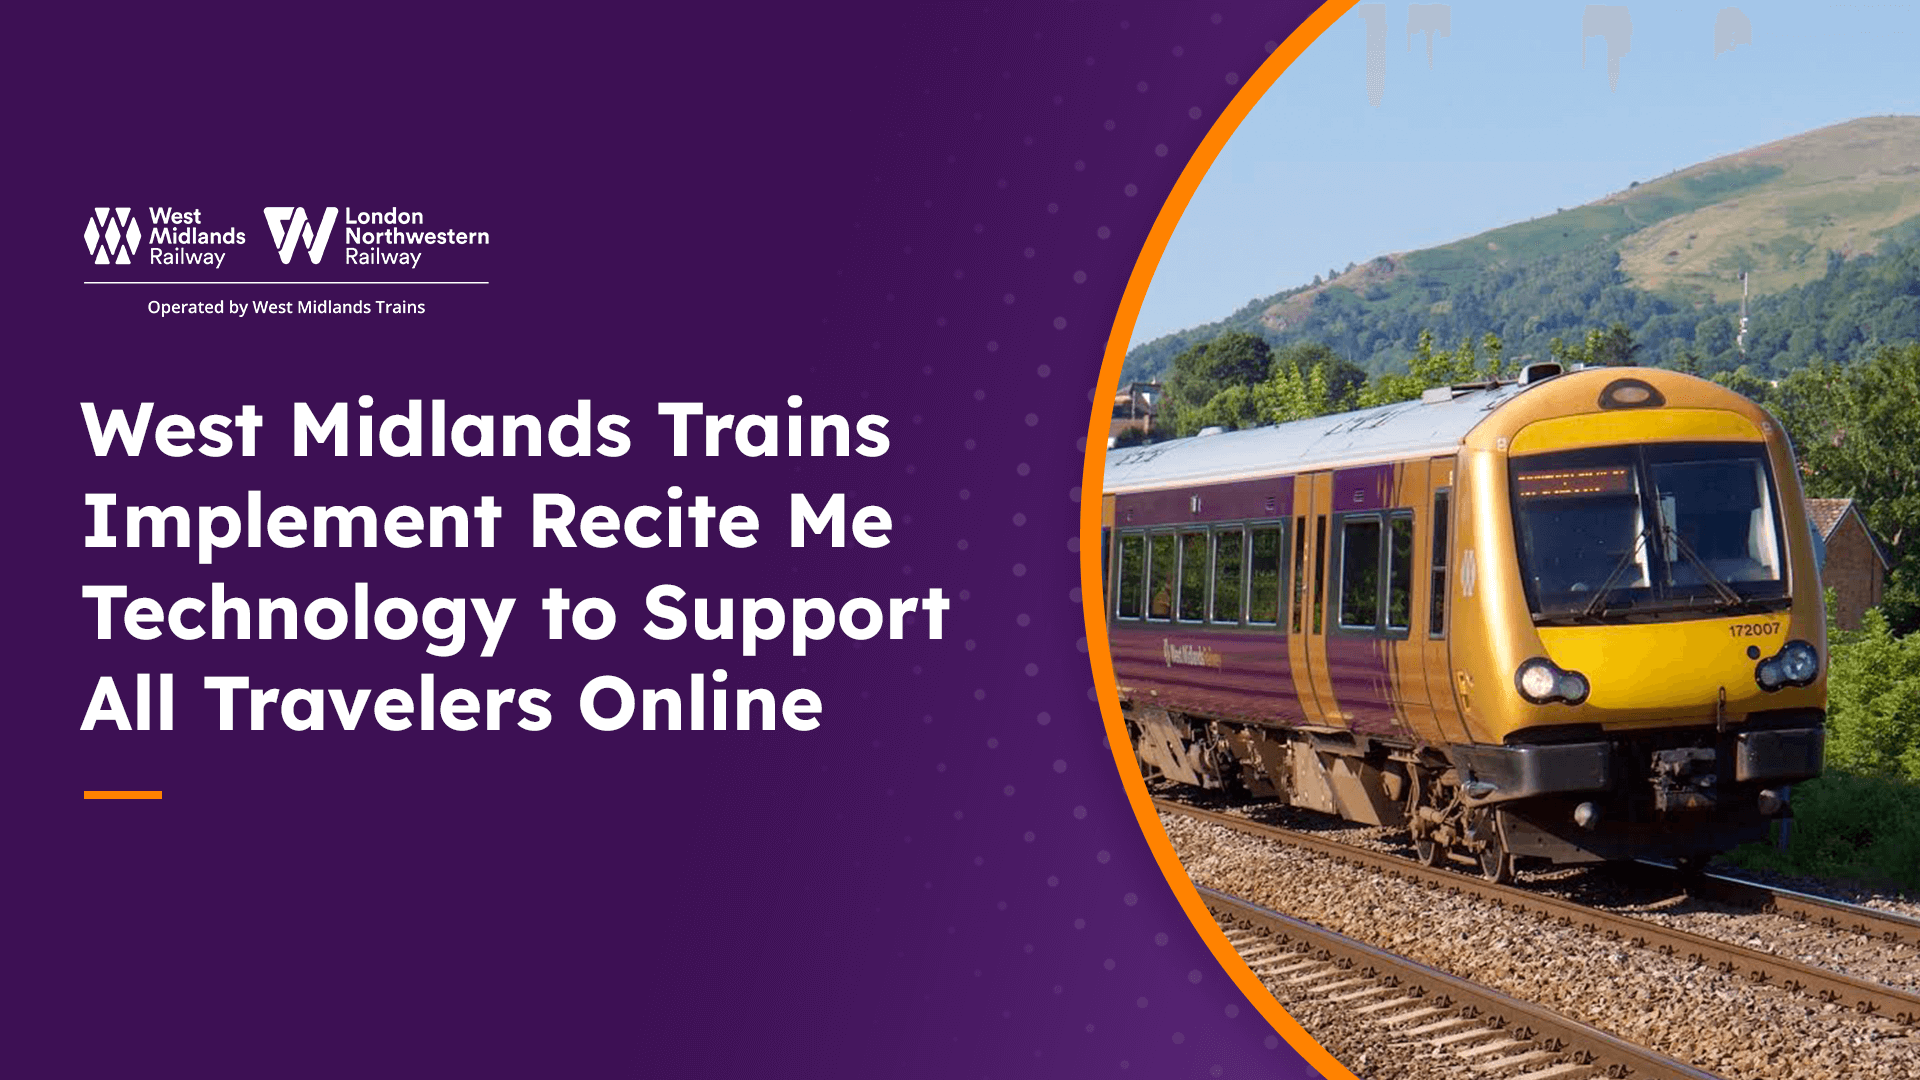 West Midlands Trains Implement Recite Me Technology to Support All Travelers Online